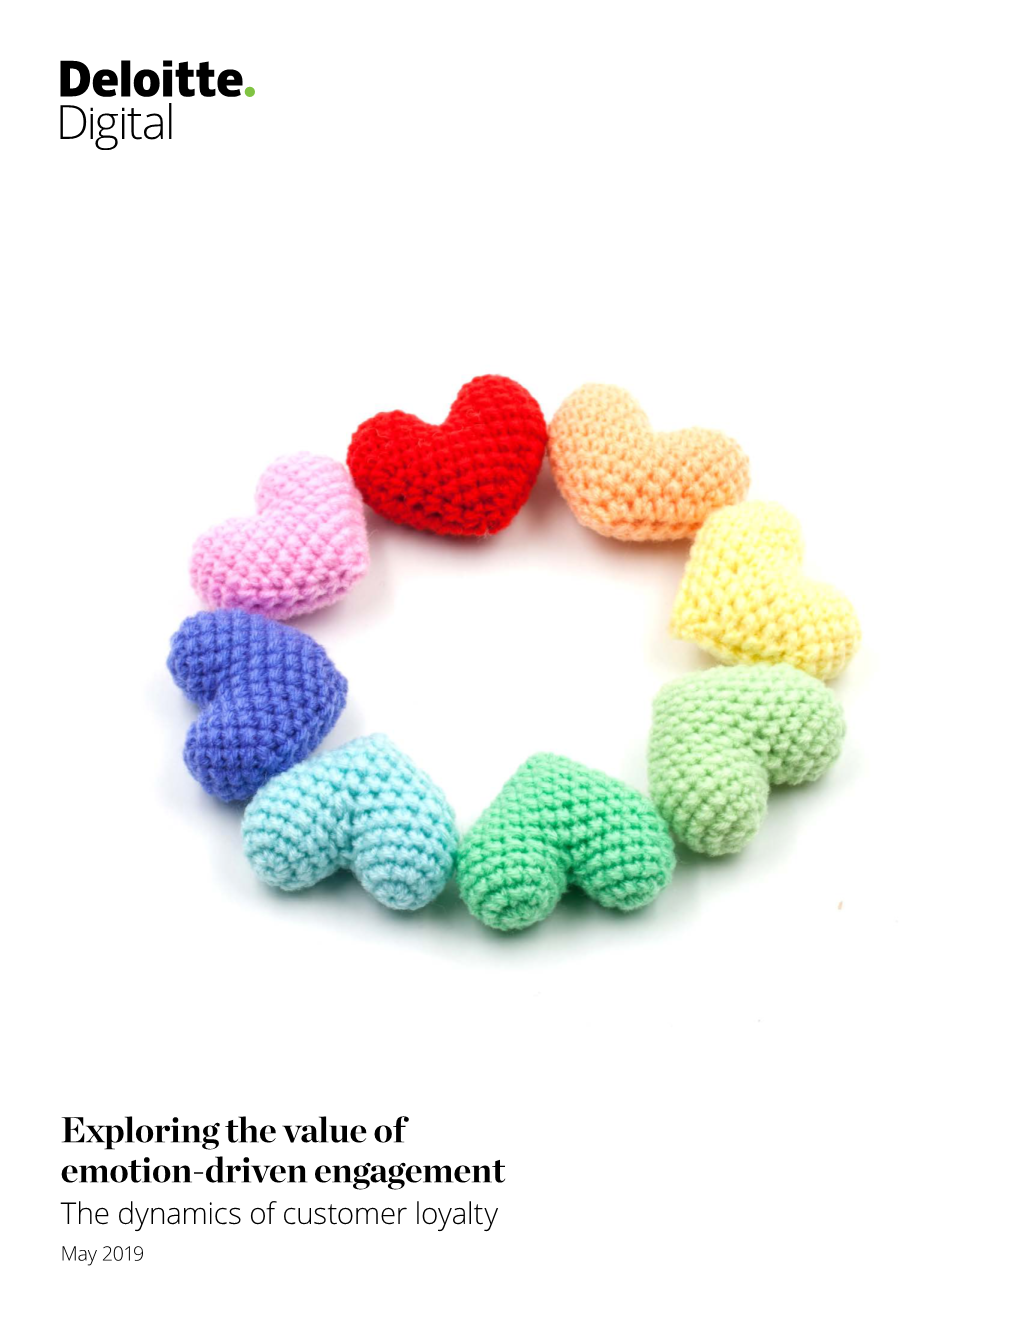 Exploring the Value of Emotion-Driven Engagement the Dynamics of Customer Loyalty May 2019 Contents